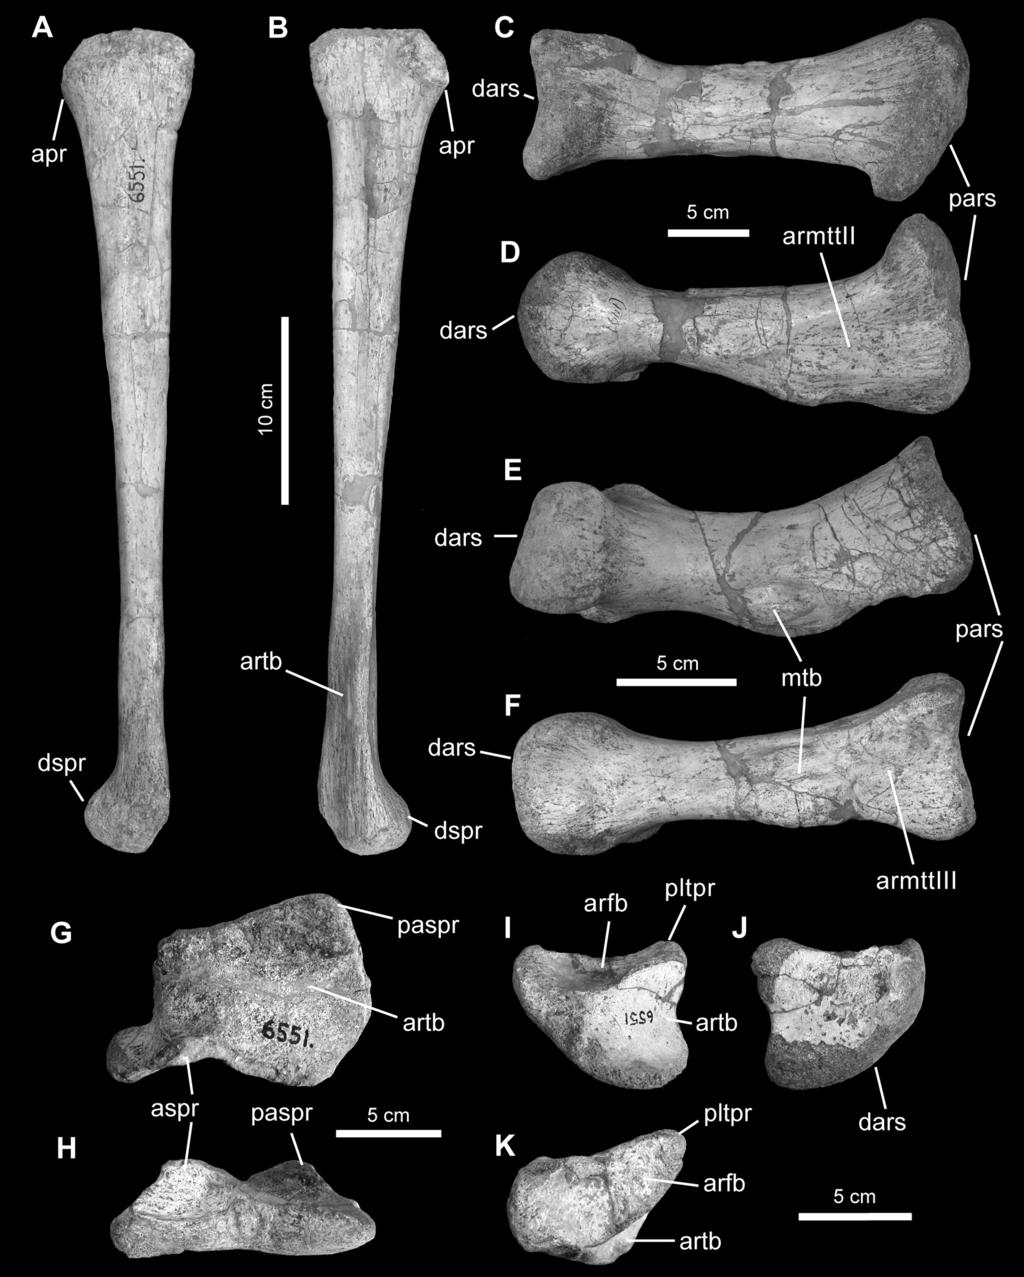 2010 PRIETO-MÁRQUEZ AND NORELL: GILMOREOSAURUS MONGOLIENSIS 33 Figure 17. Hind-limb elements of Gilmoreosaurus mongoliensis. A B, left fibula (AMNH FARB 30748) in lateral and medial views.